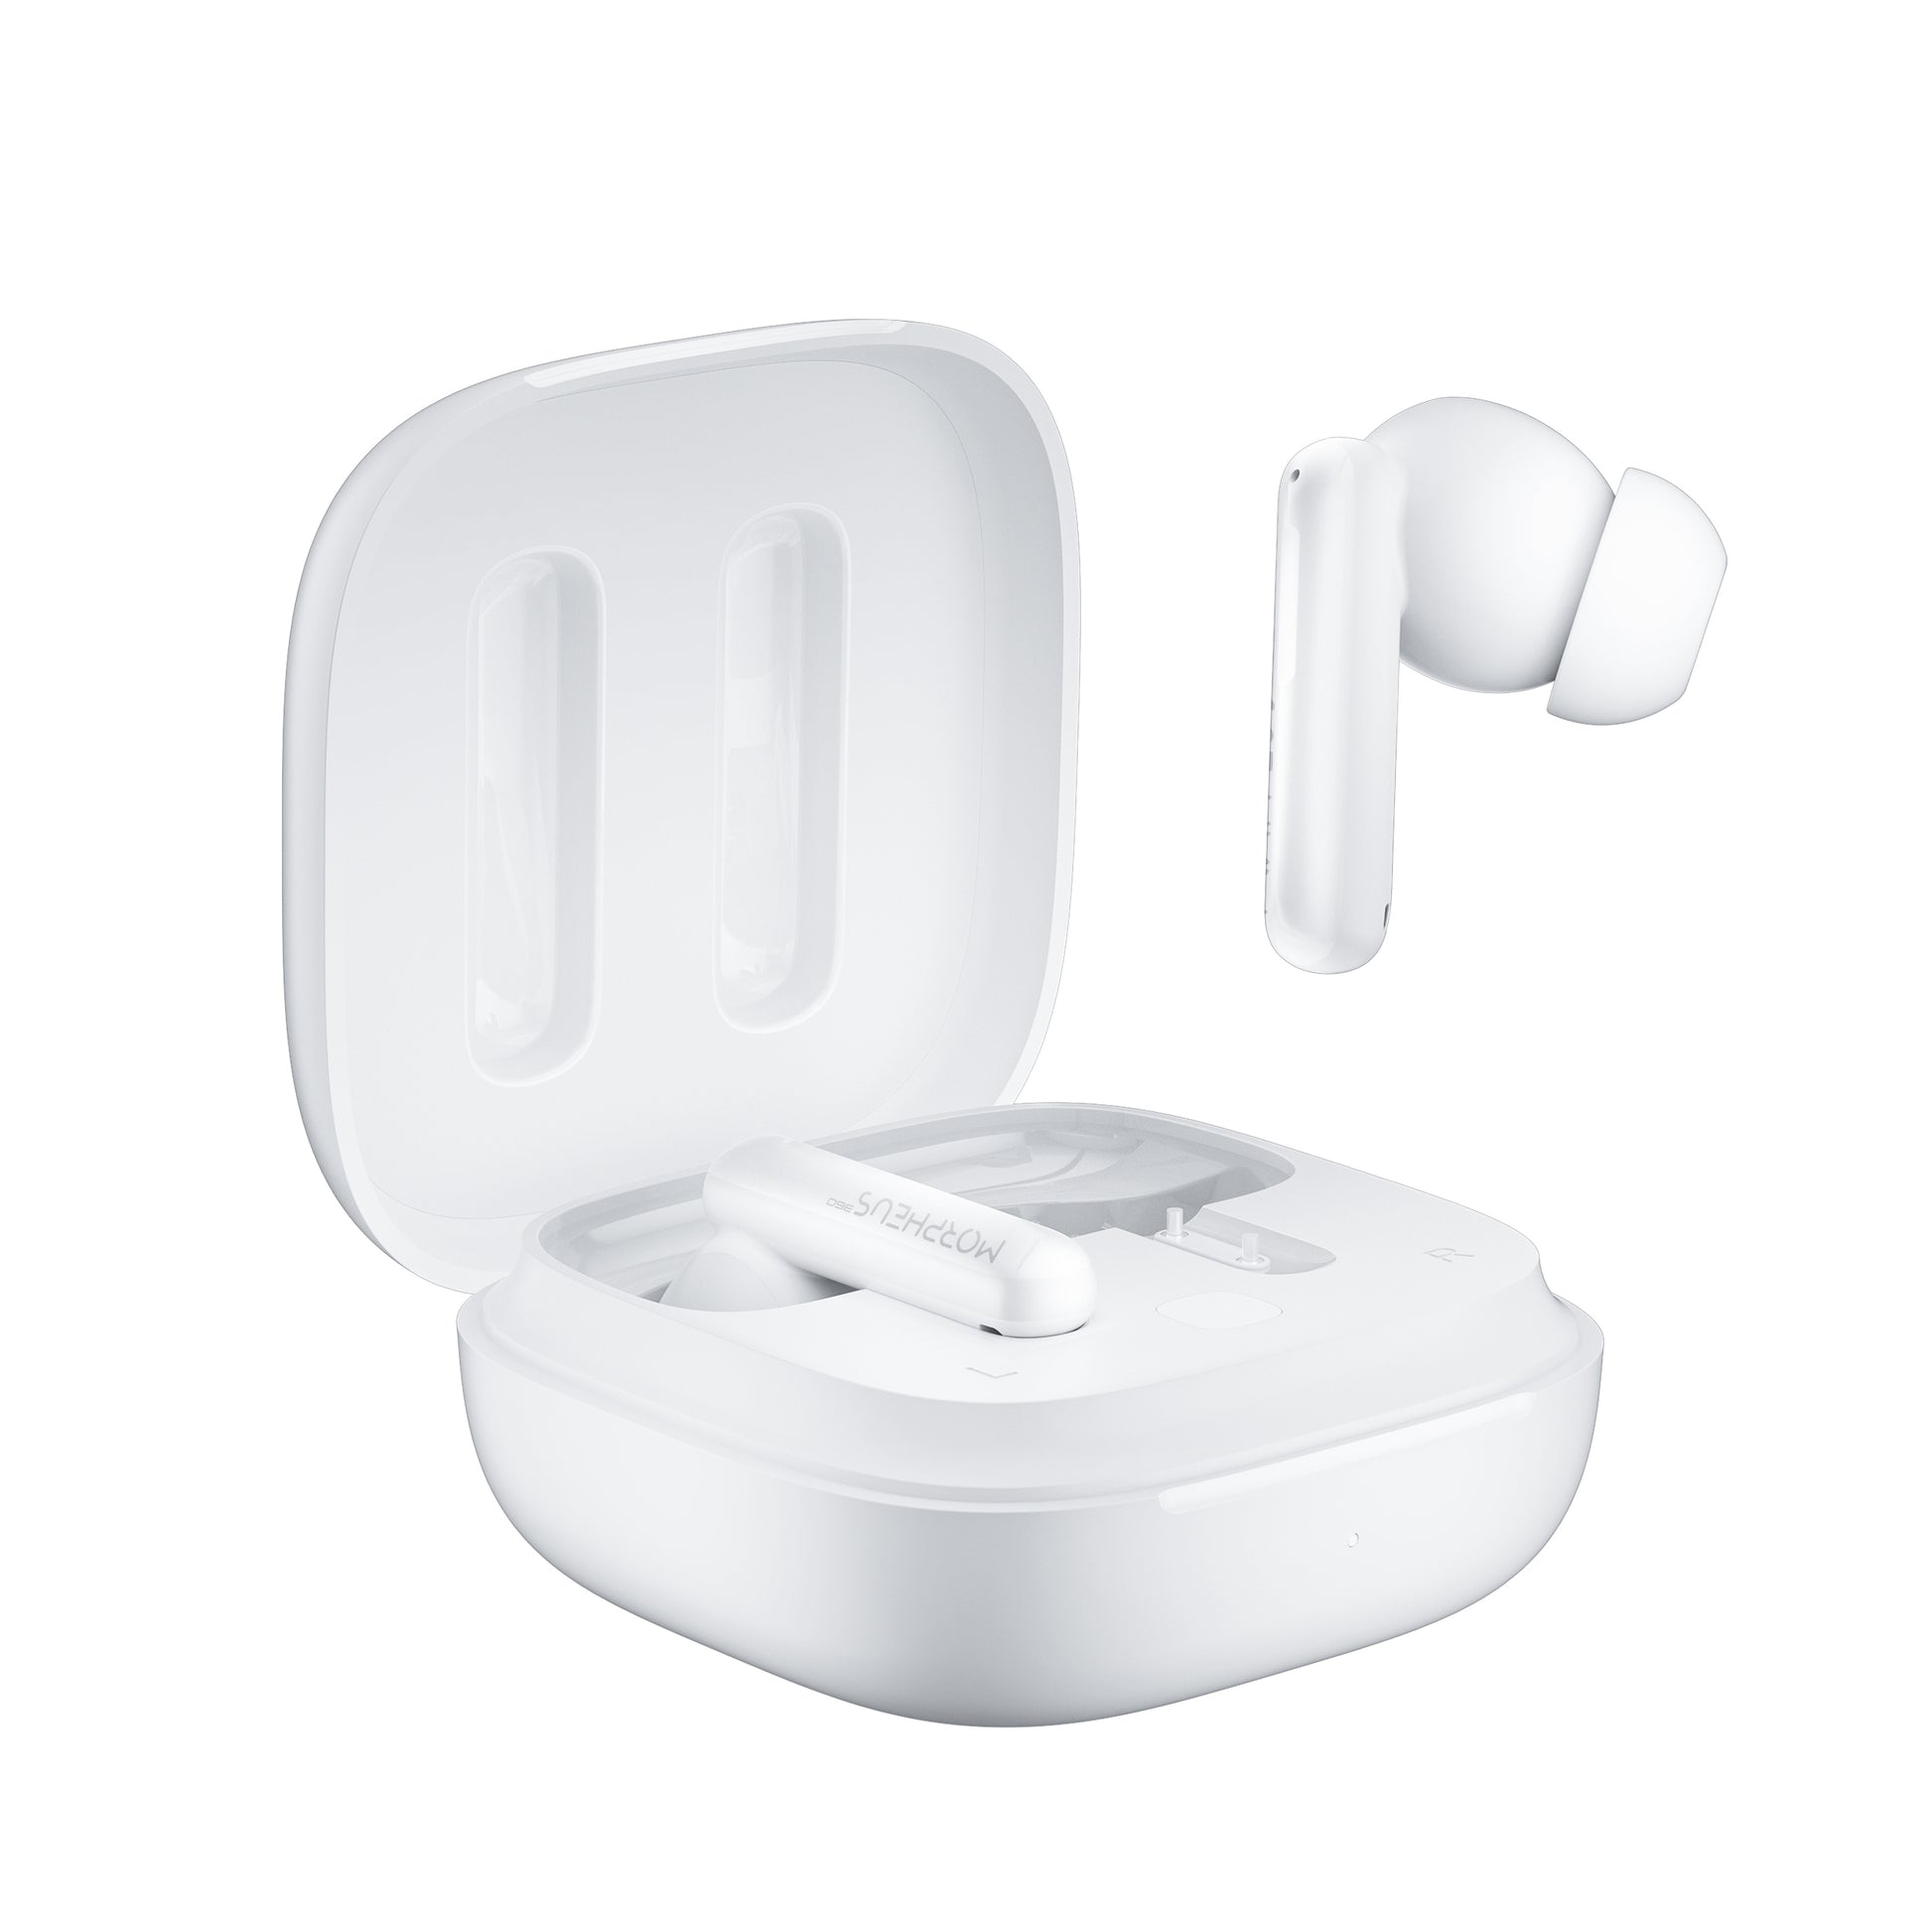 Photo of Morpheus 360 Nemesis ANC True Wireless Earbuds in white, front view with charging case open, the right stick earbud is above outside of the charging case while the left earbud is resting in charging case